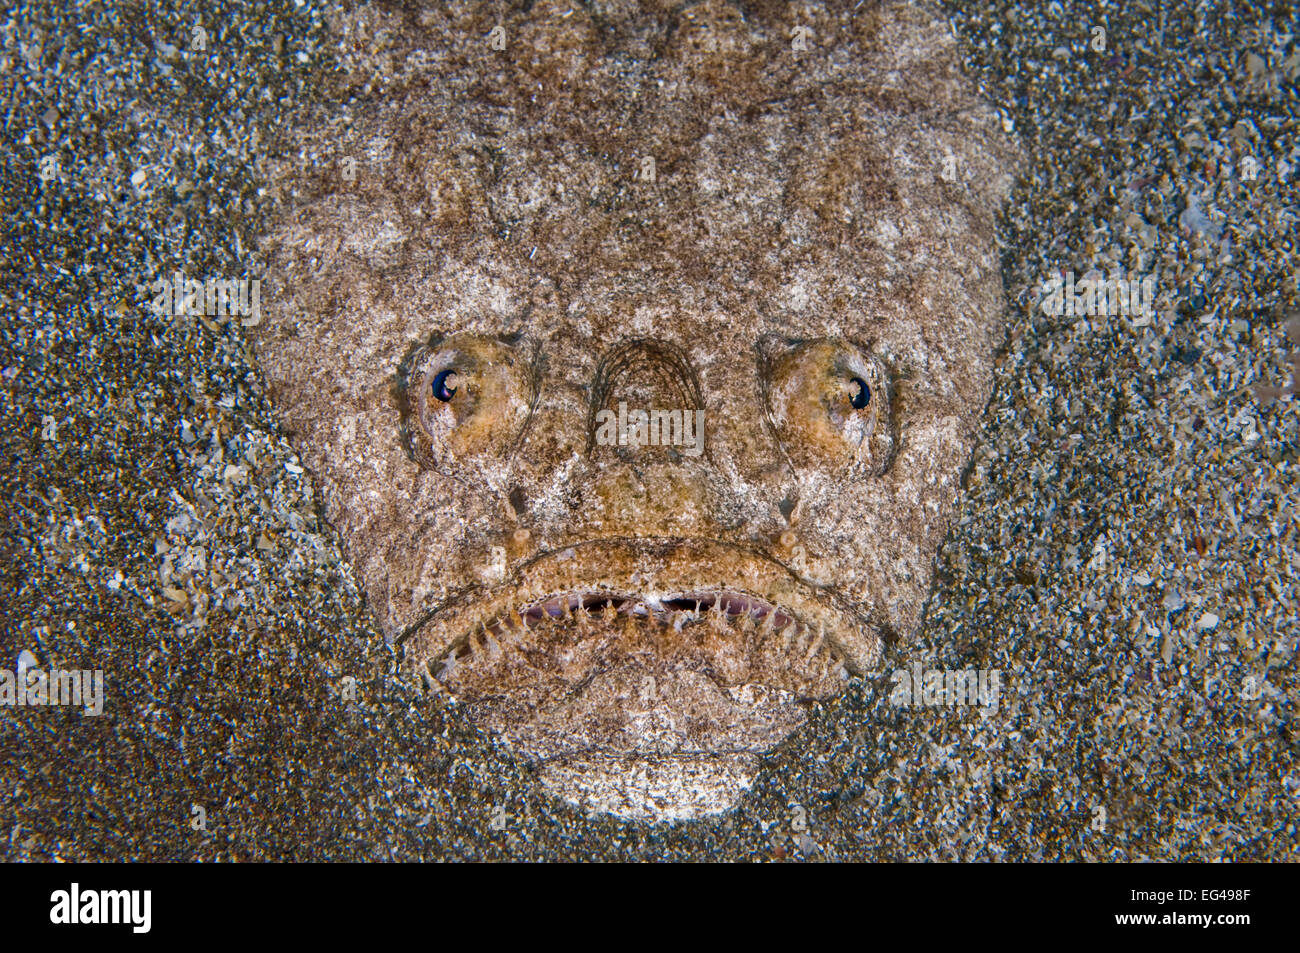 A portrait an Atlantic stargazer (Uranoscopus scaber) buried in the sand waiting to ambush prey. This species can also use its hairy tongue as lure. El Cabron Gran Canaria Canary Islands Spain. East Atlantic Ocean. Stock Photo